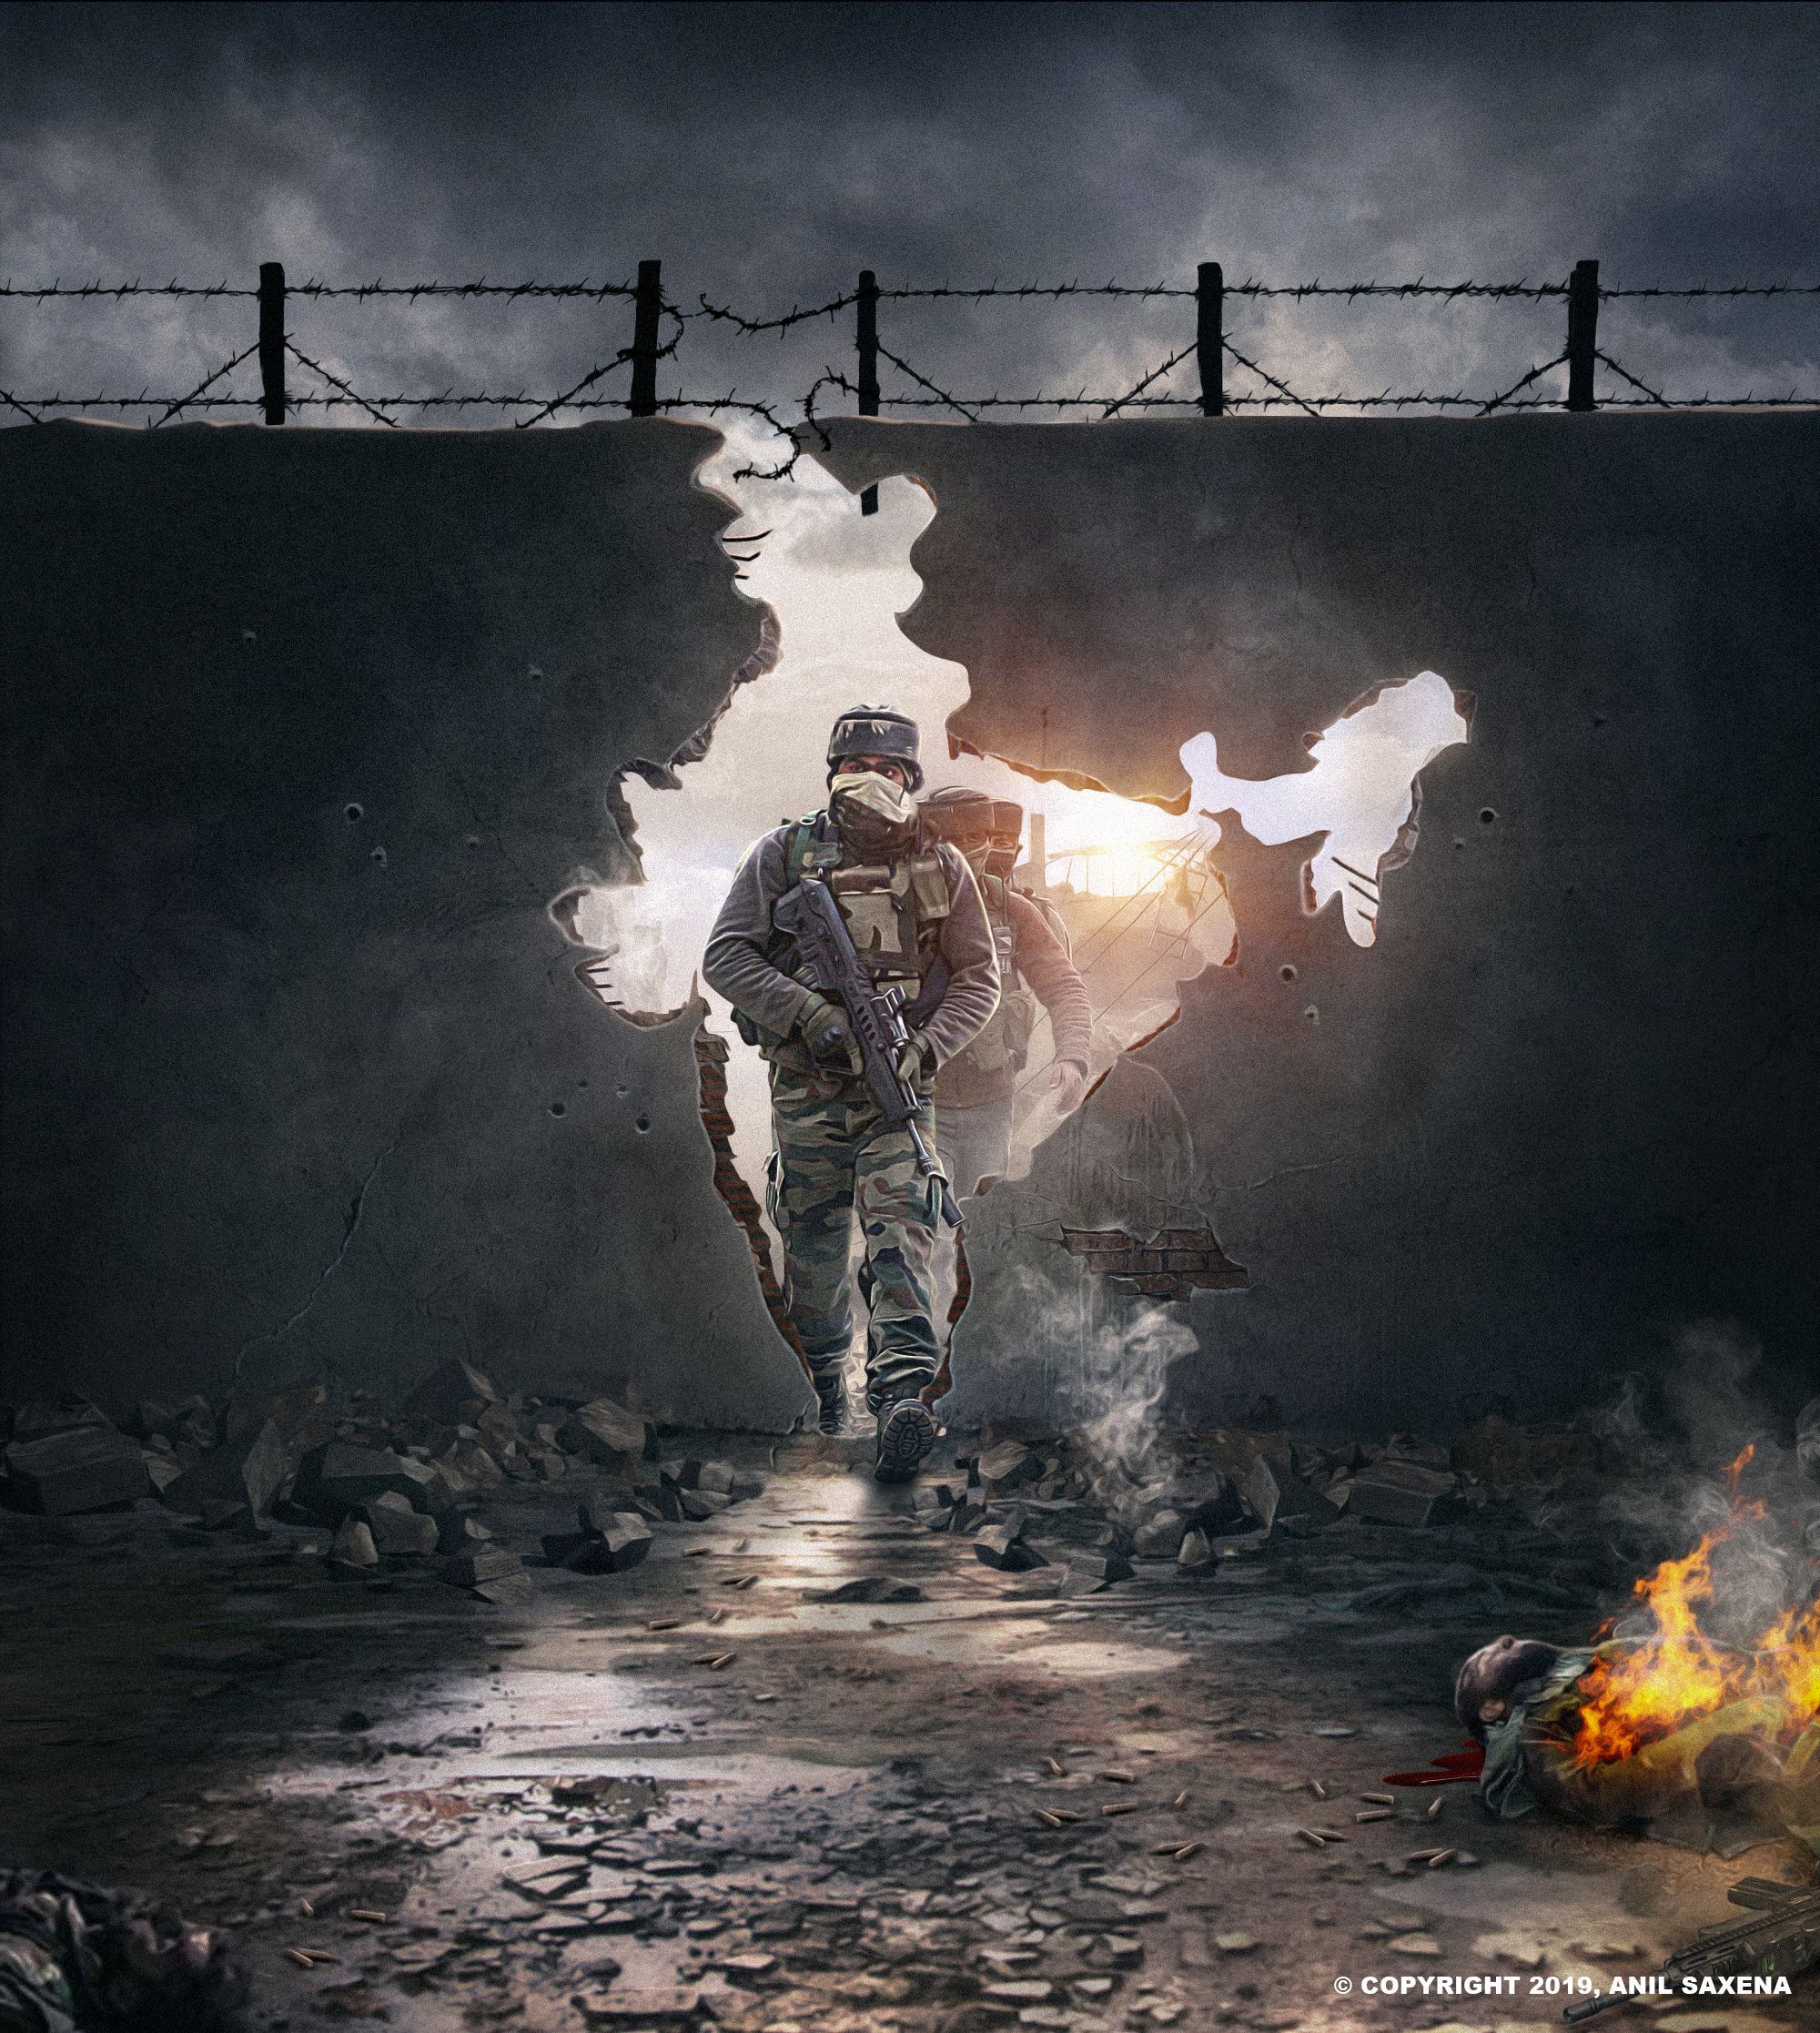 Behance - 为您呈现. Indian army wallpaper, Army wallpaper, Army